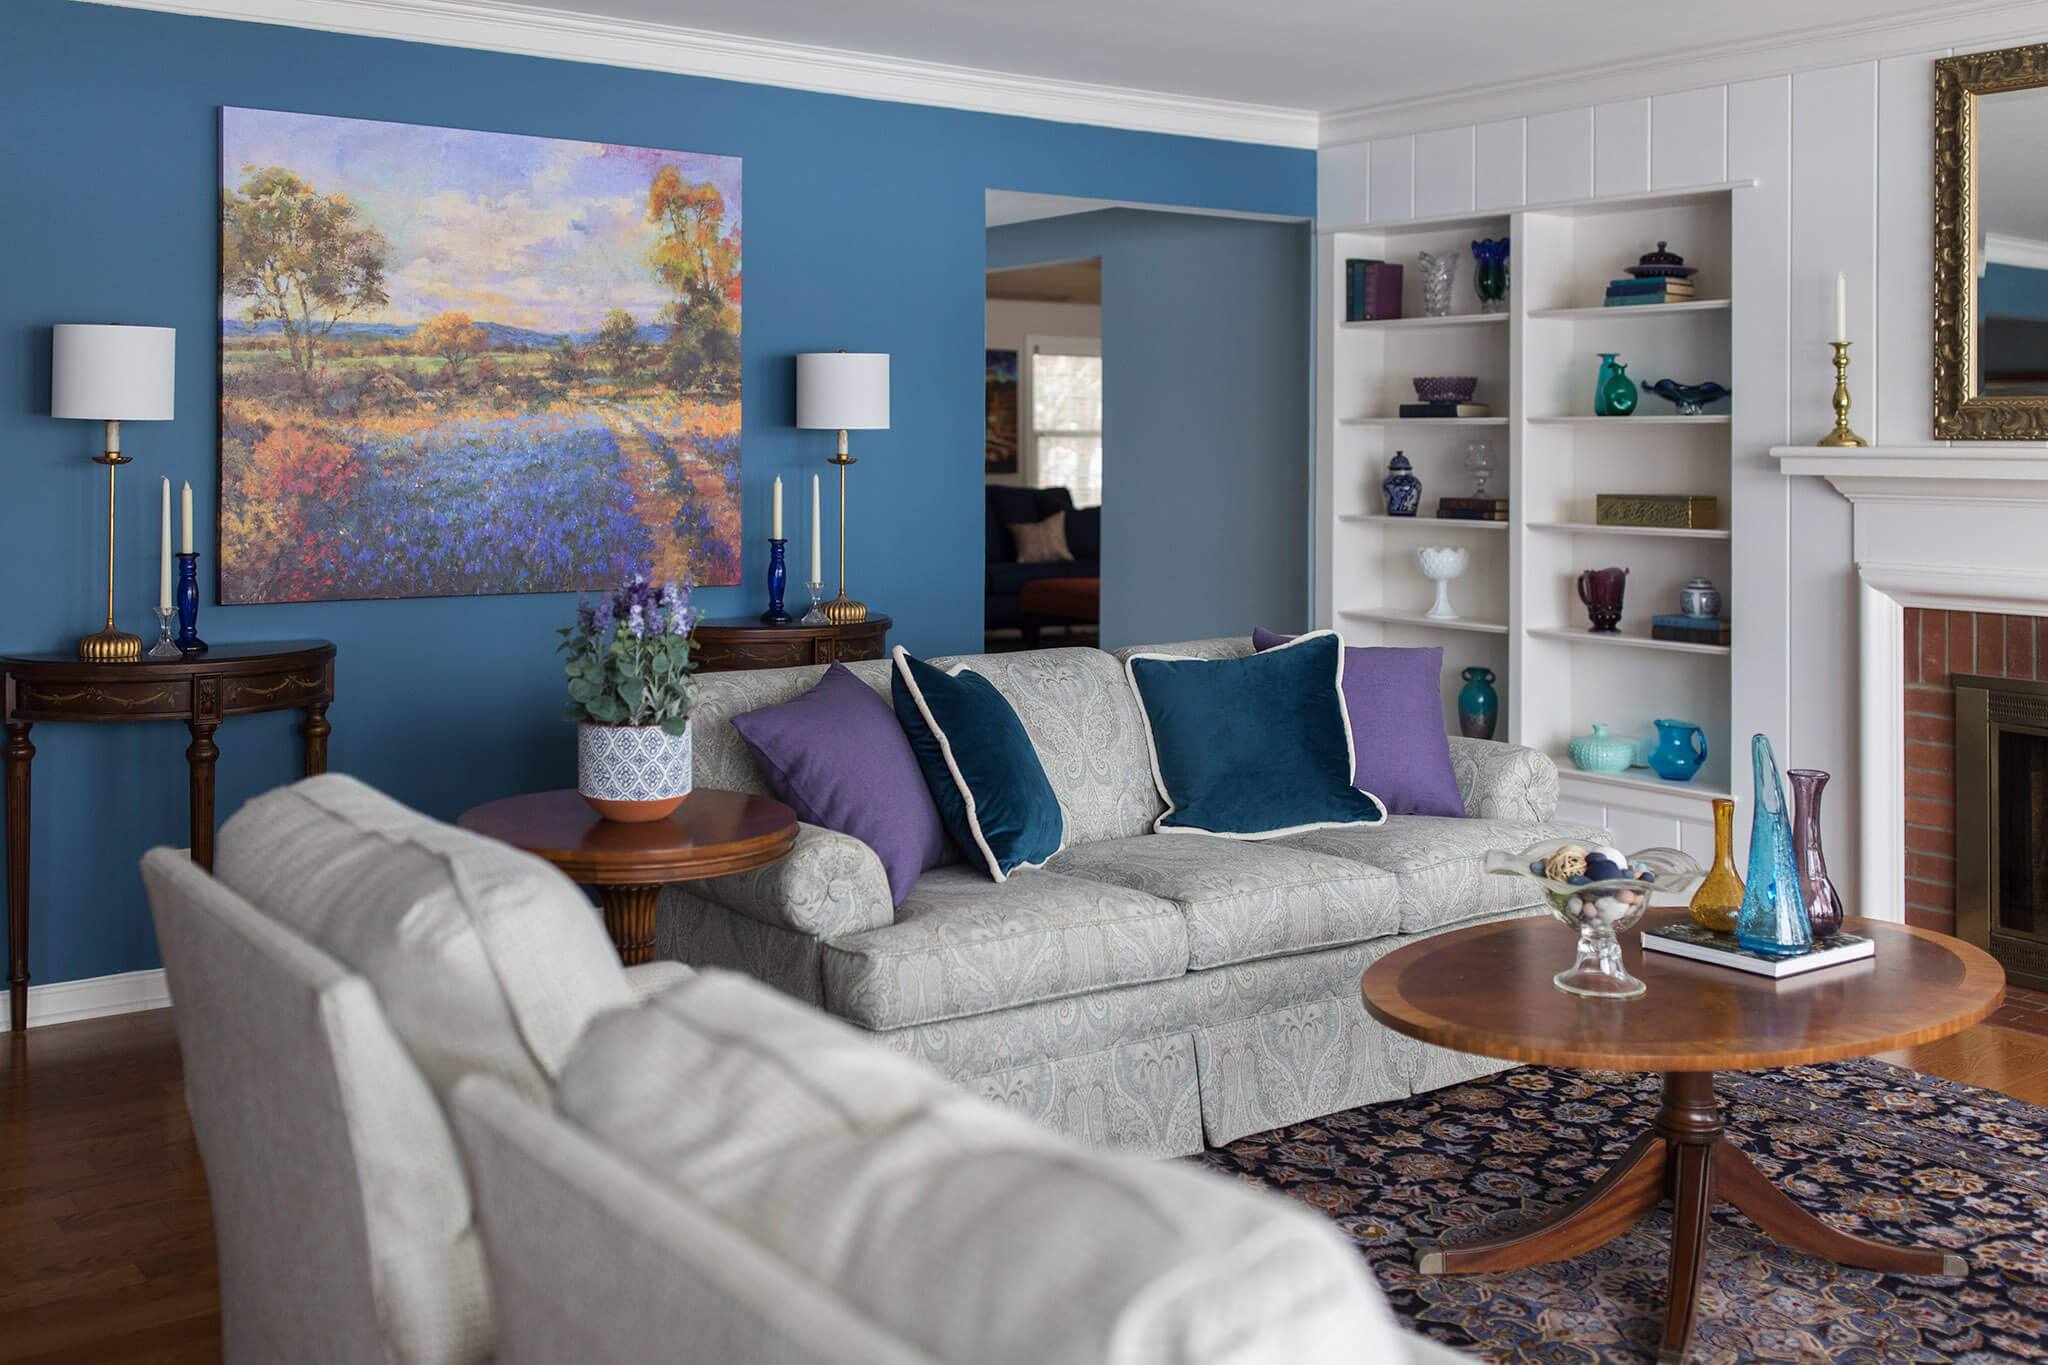 calming medium blue walls in Family Room After new pillows, artwork, rugs, and vintage accessories.